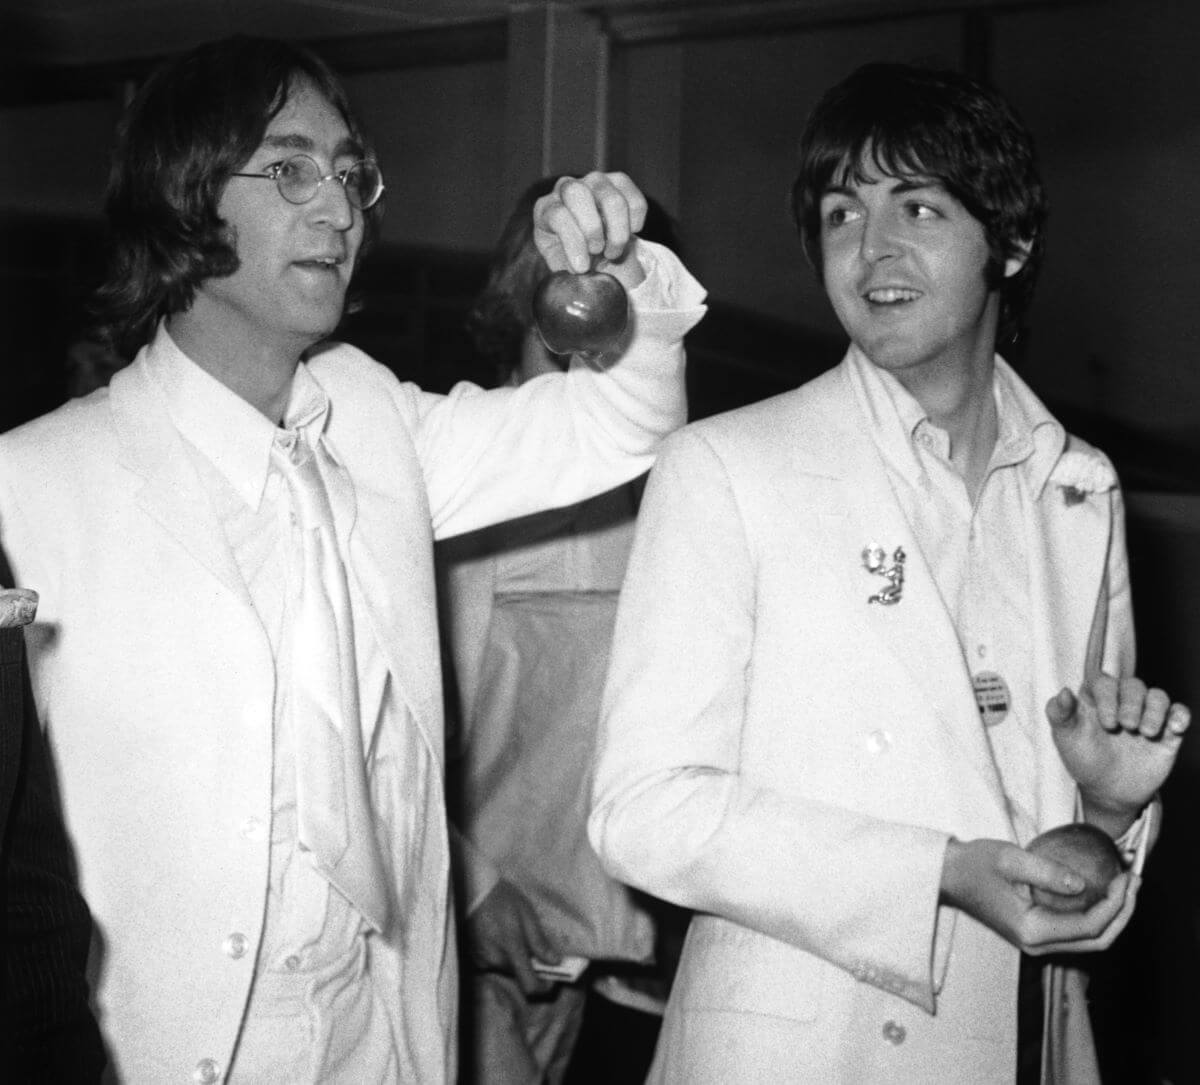 A black and white picture of John Lennon and Paul McCartney wearing white suits and holding apples.